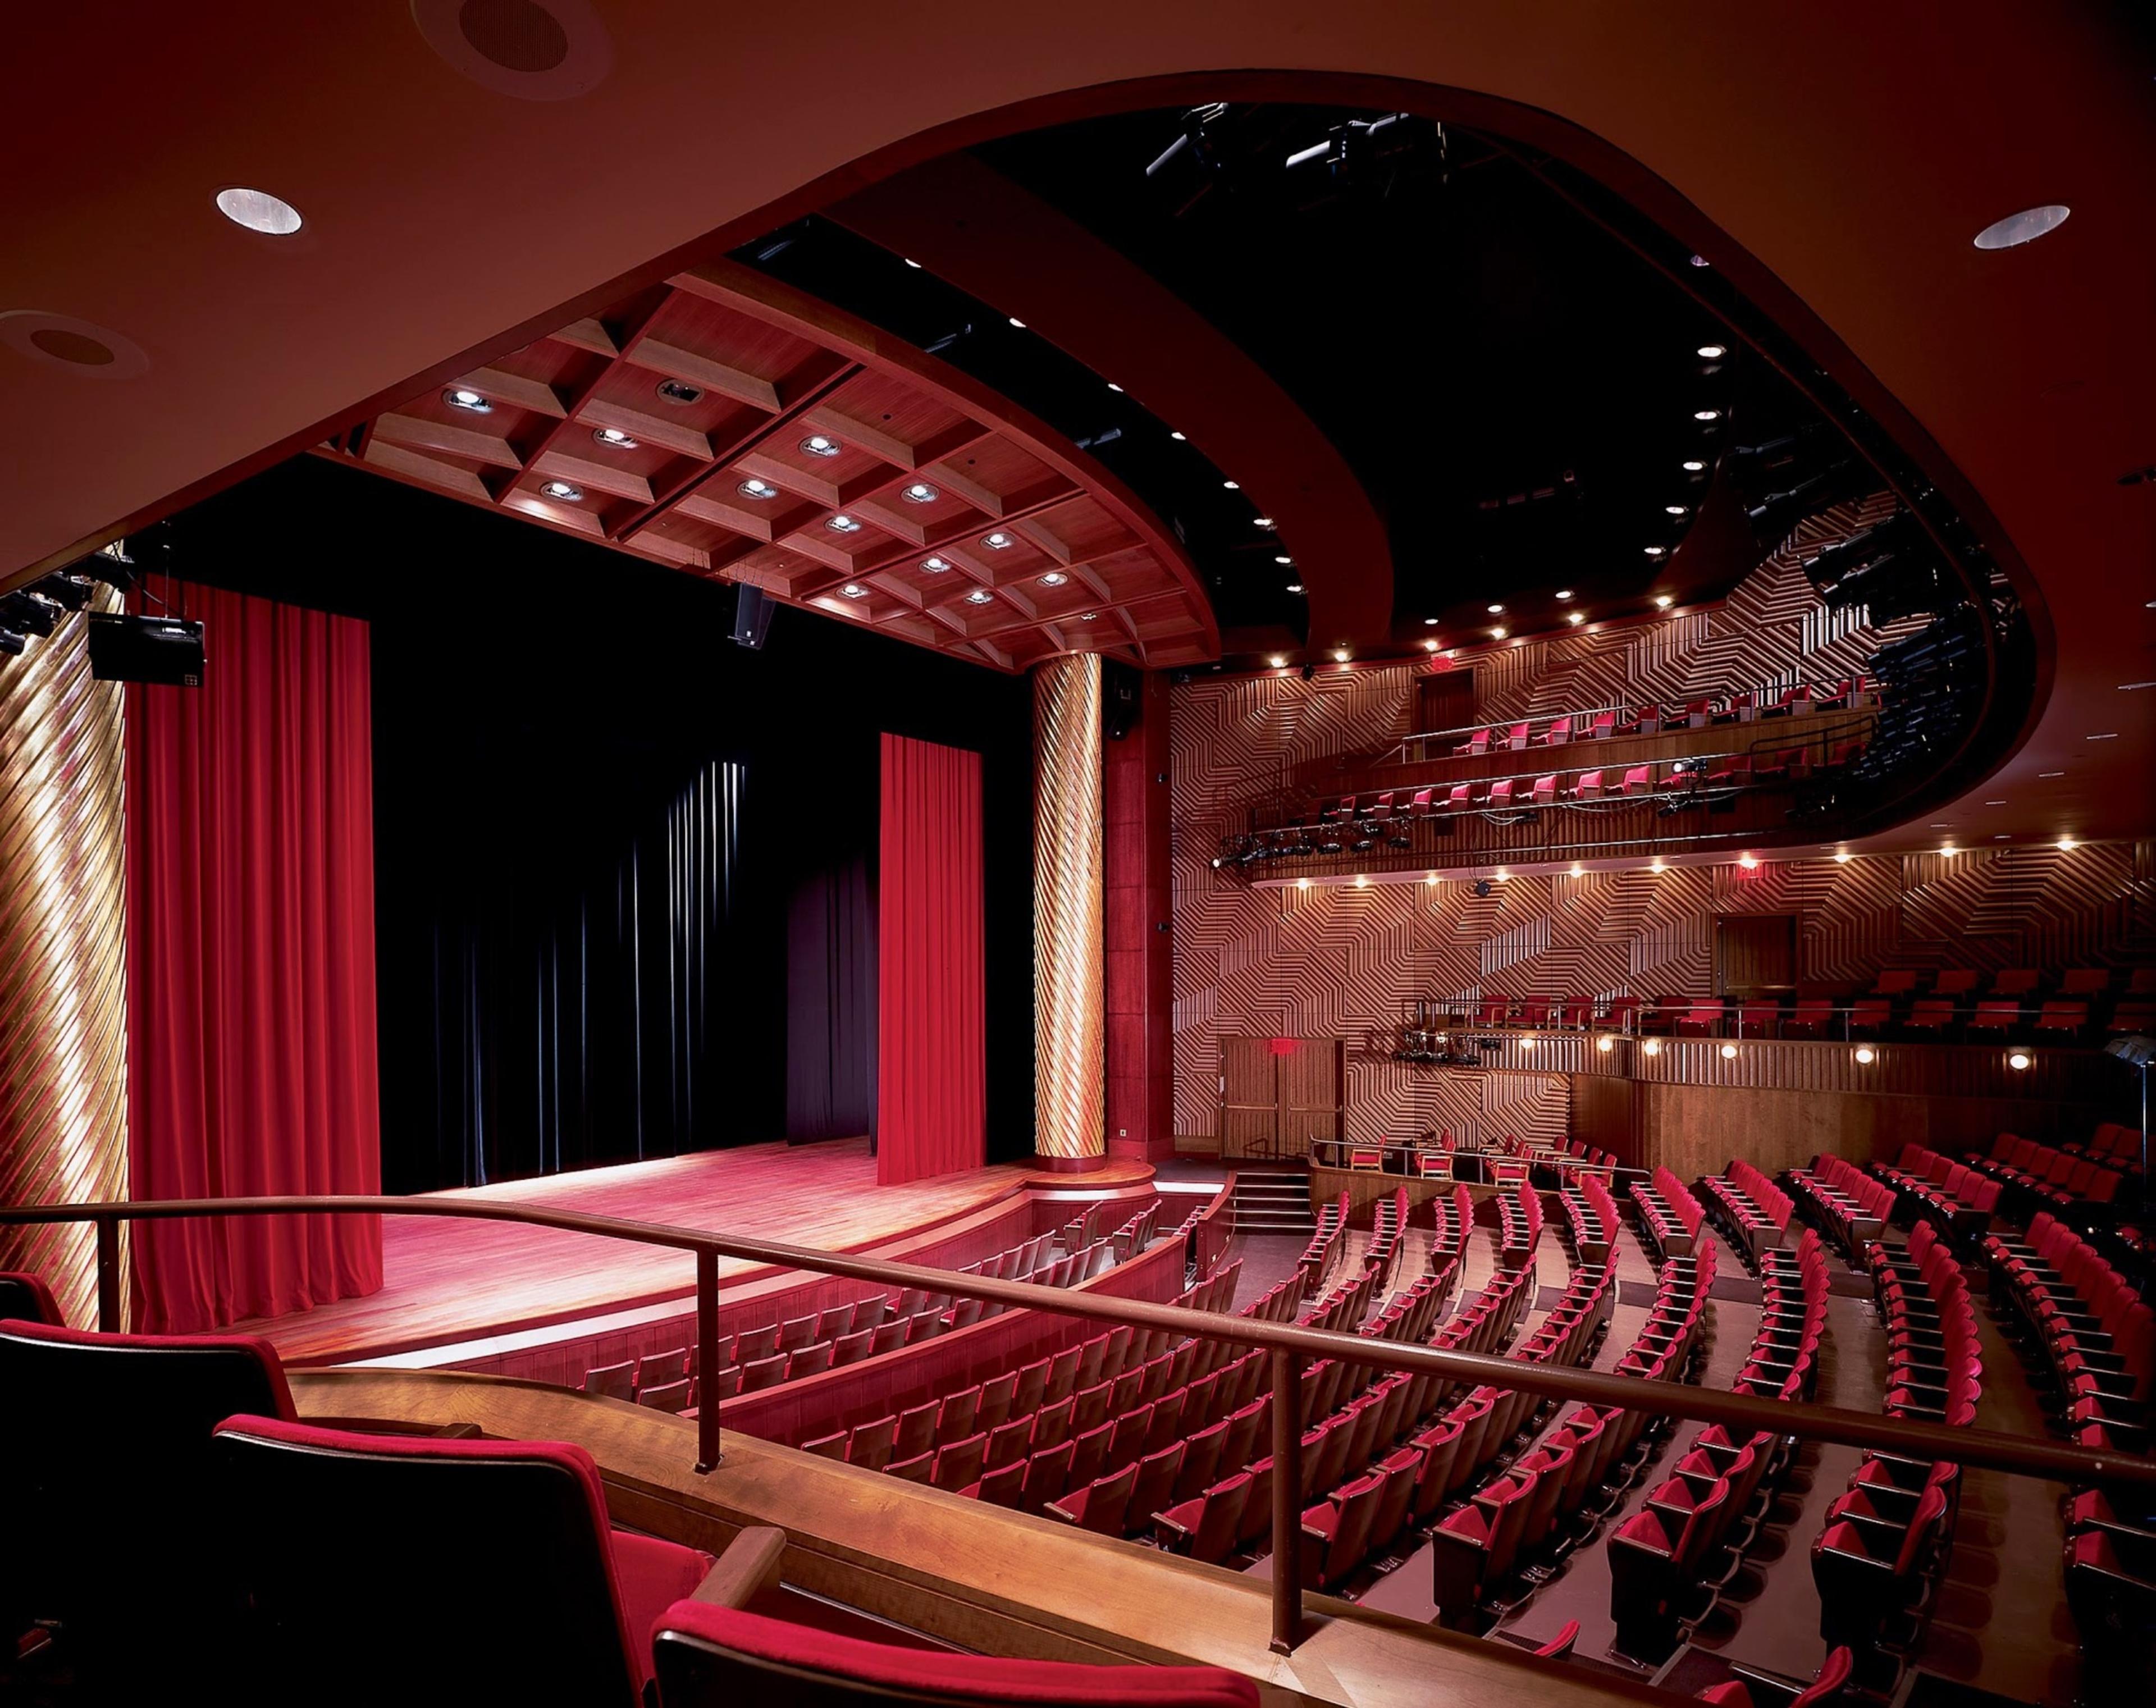 NYU Skirball Center for the Performing Arts